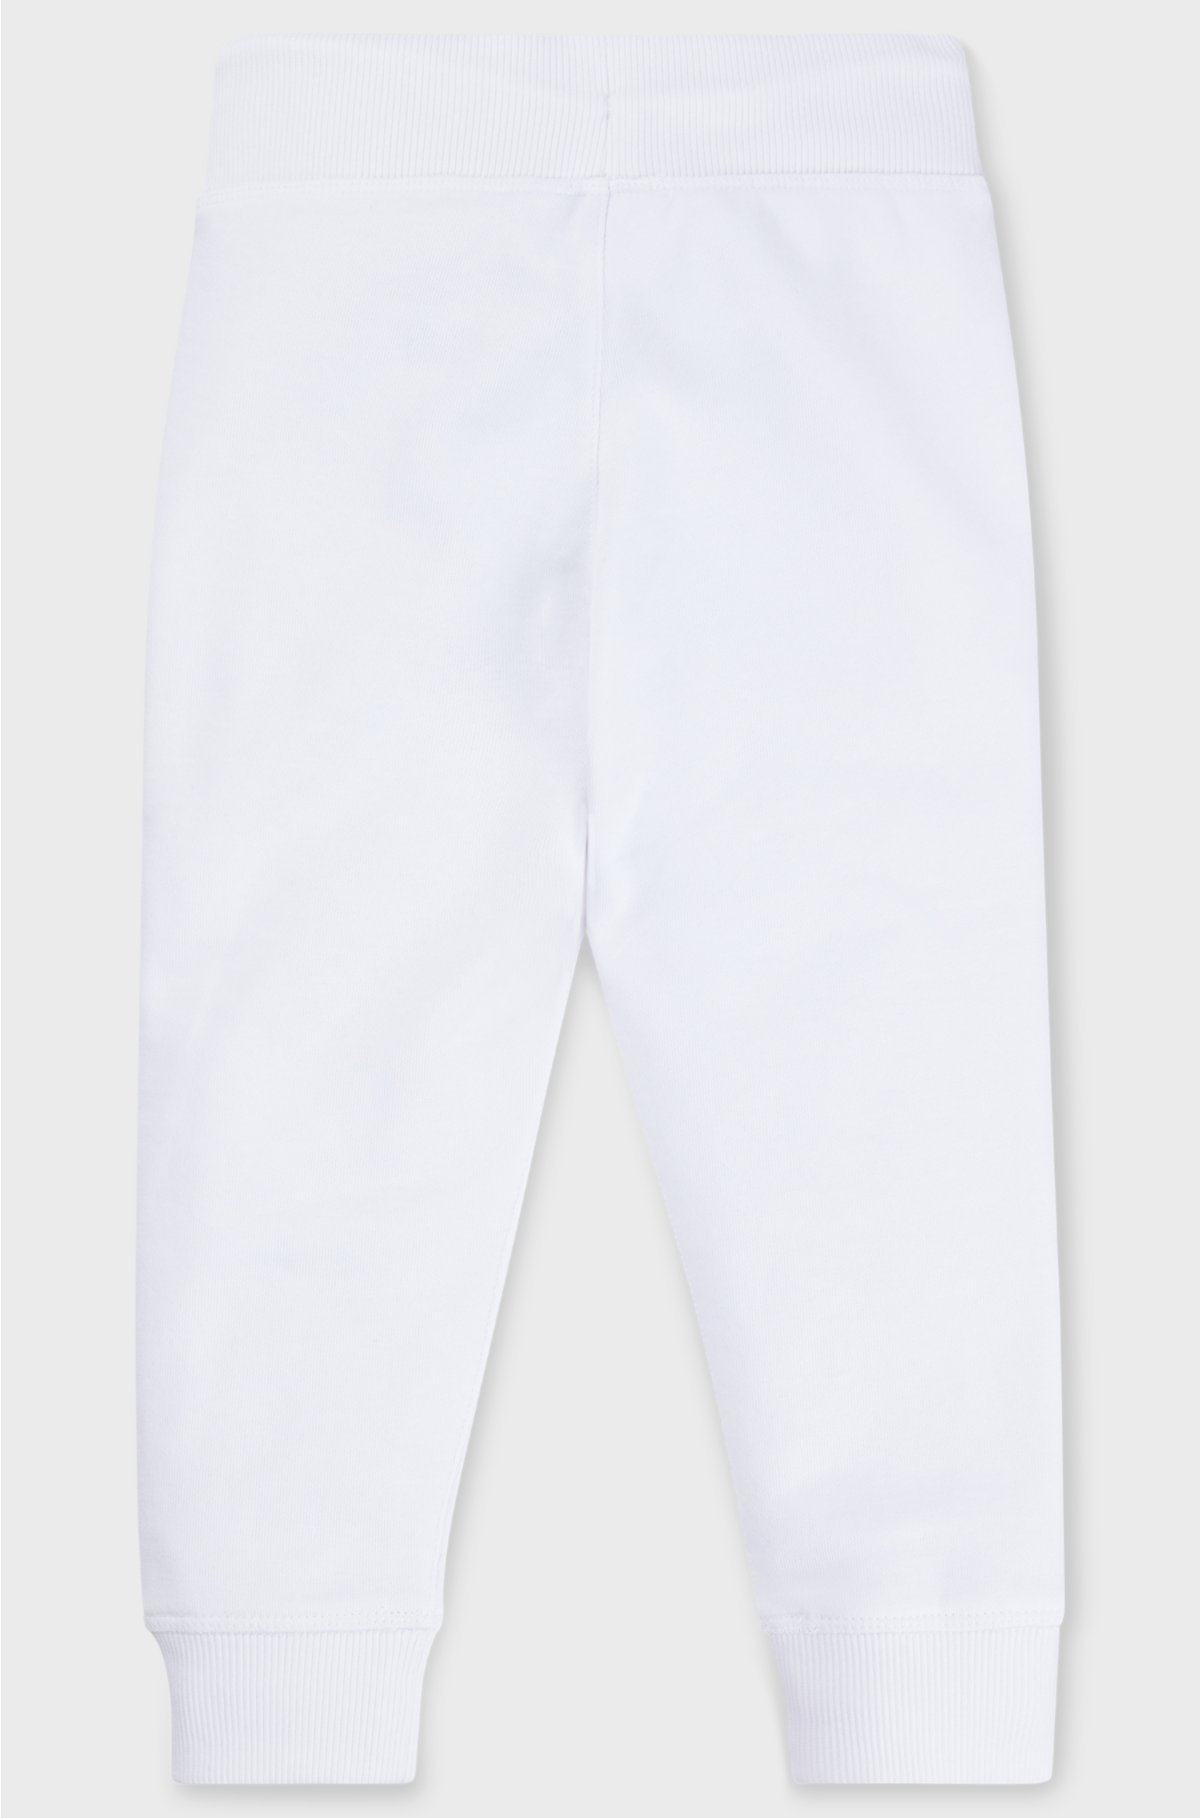 Kids' fleece tracksuit bottoms with marker-style logo, White